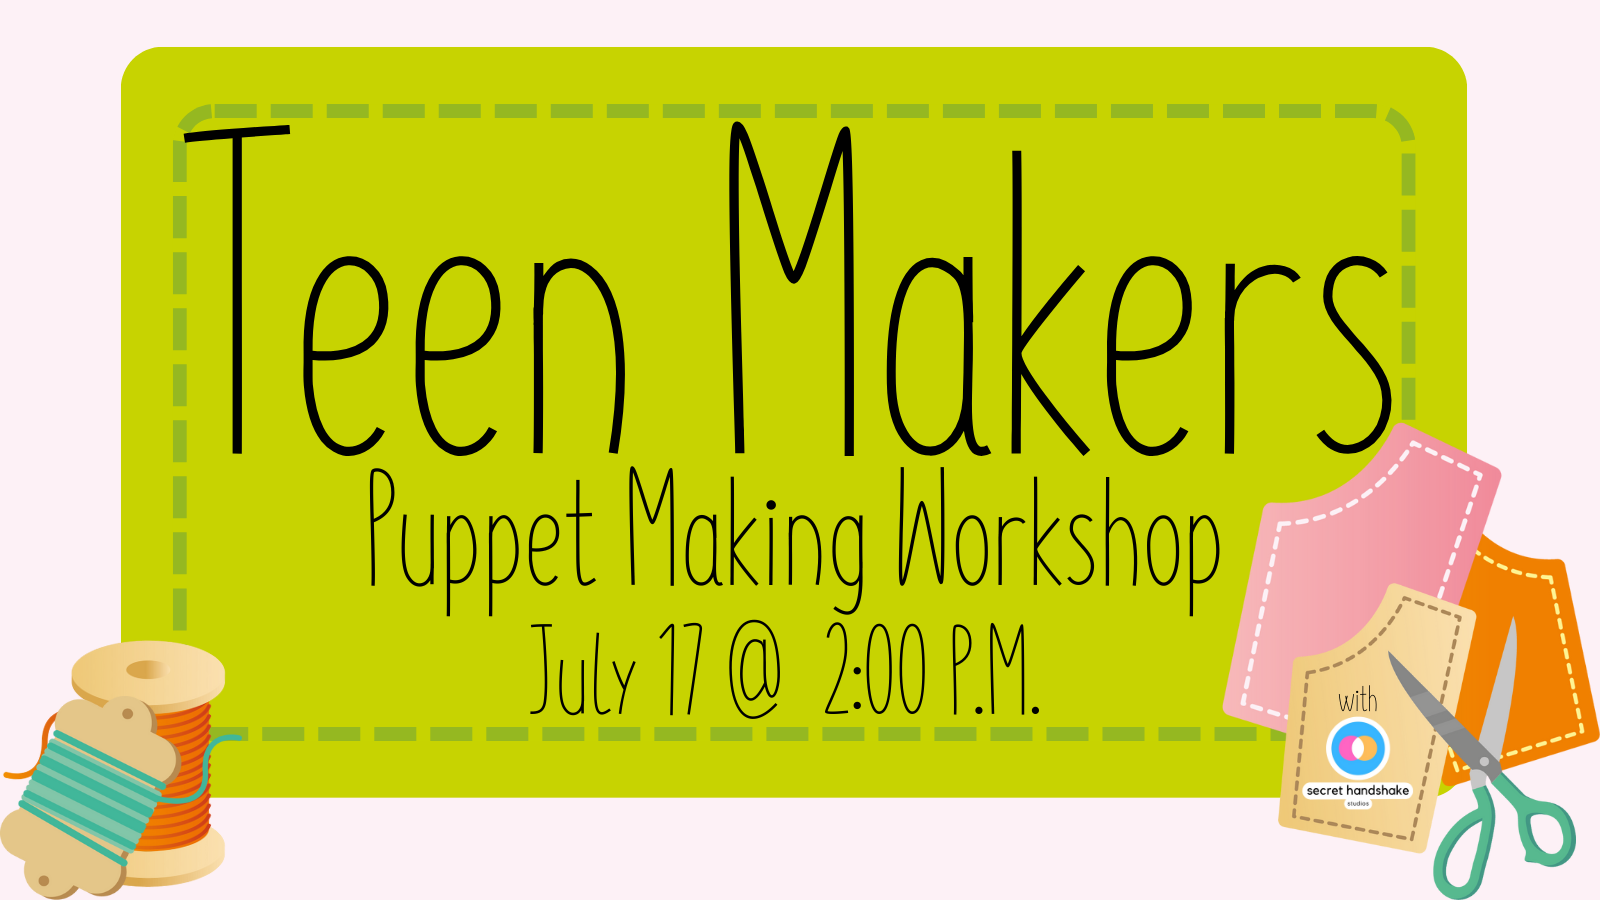 Craft themed border with text that reads: Teen Makers: Puppet Making Workshop July 17 @ 2:00 pm.